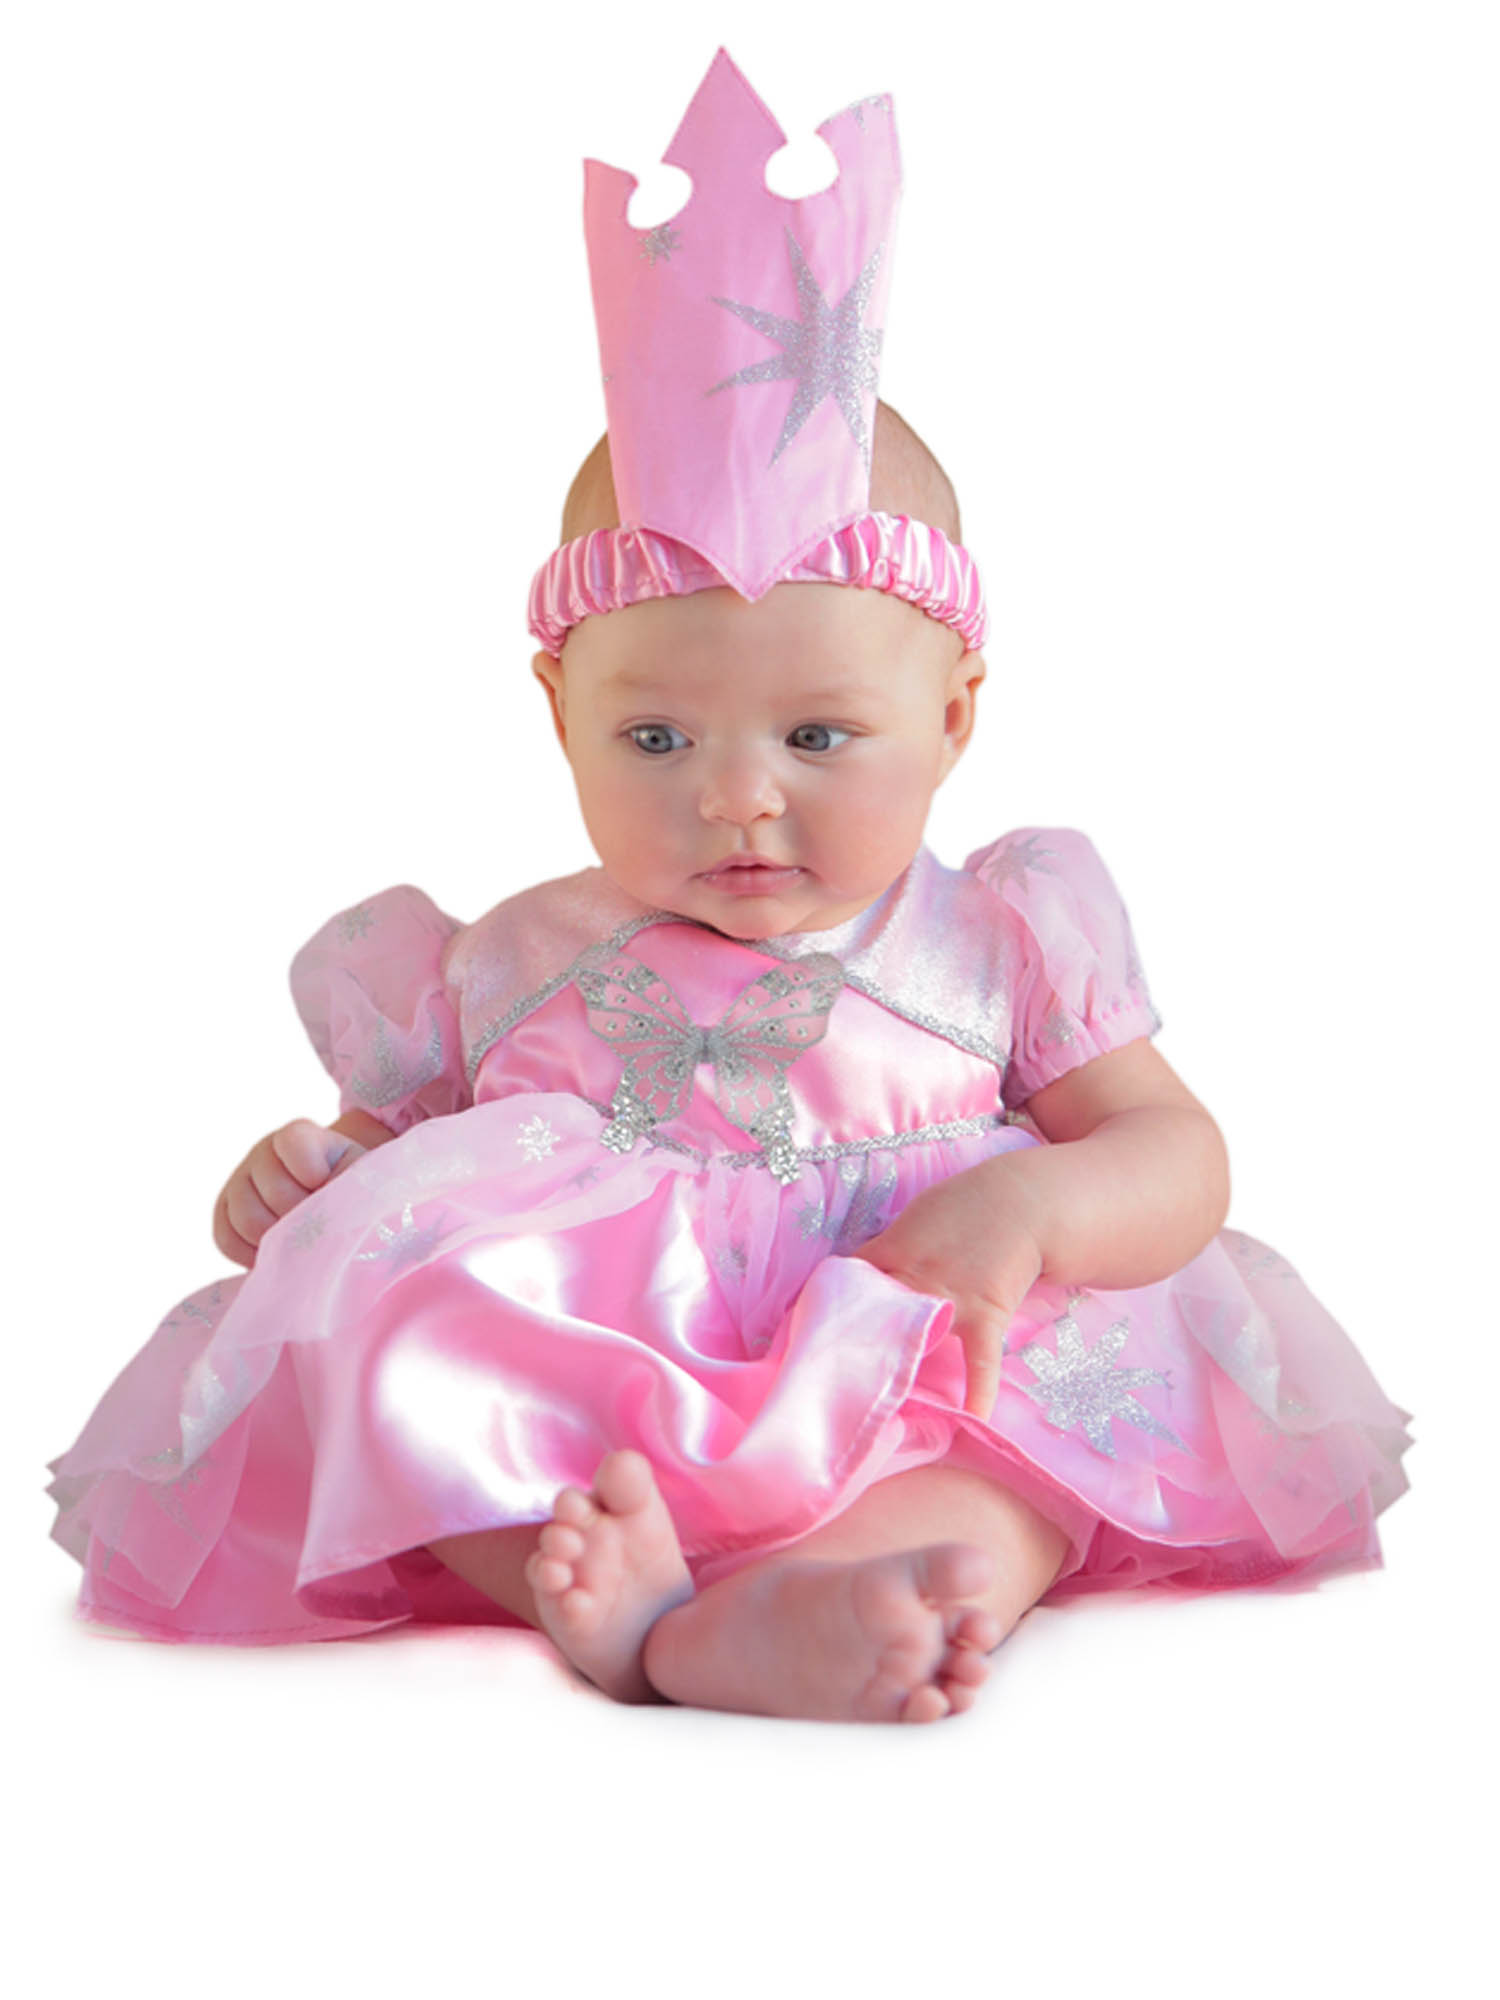 The Wizard Of Oz Glindathe Good Witch Infant Costume - PartyBell.com